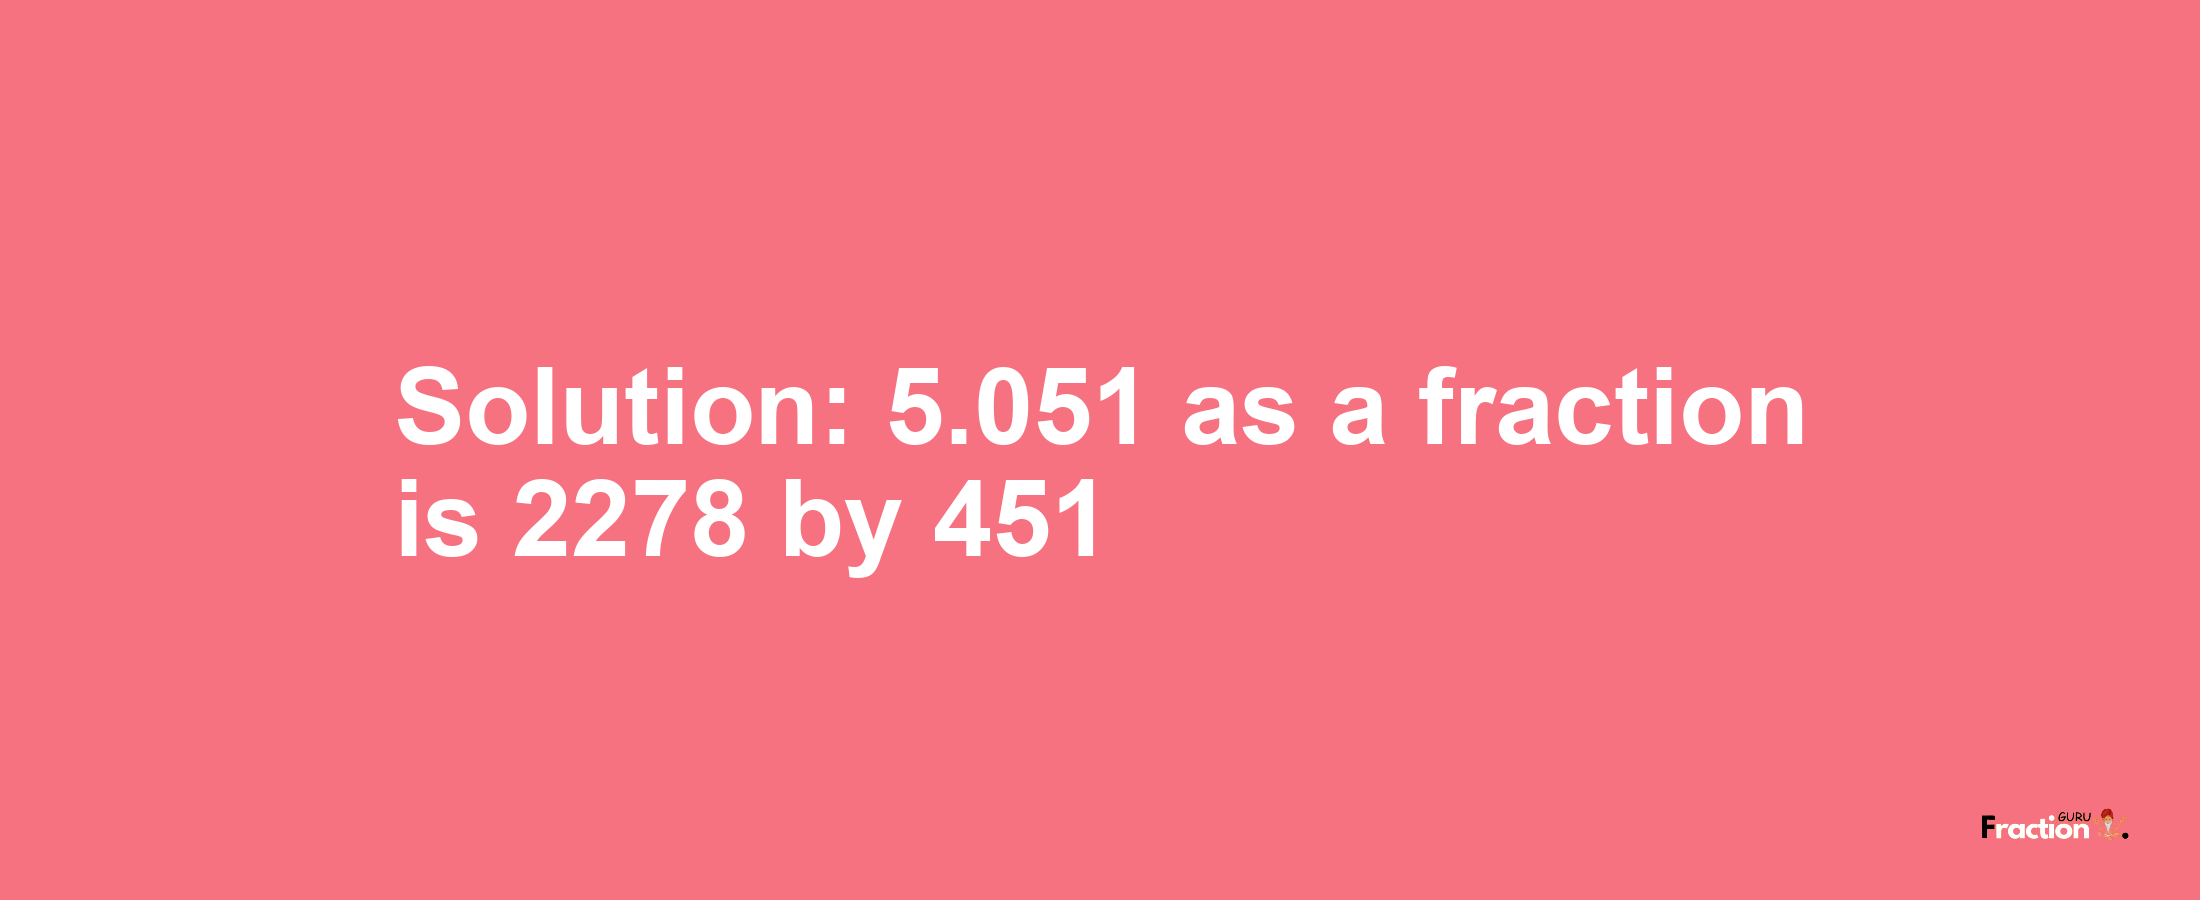 Solution:5.051 as a fraction is 2278/451